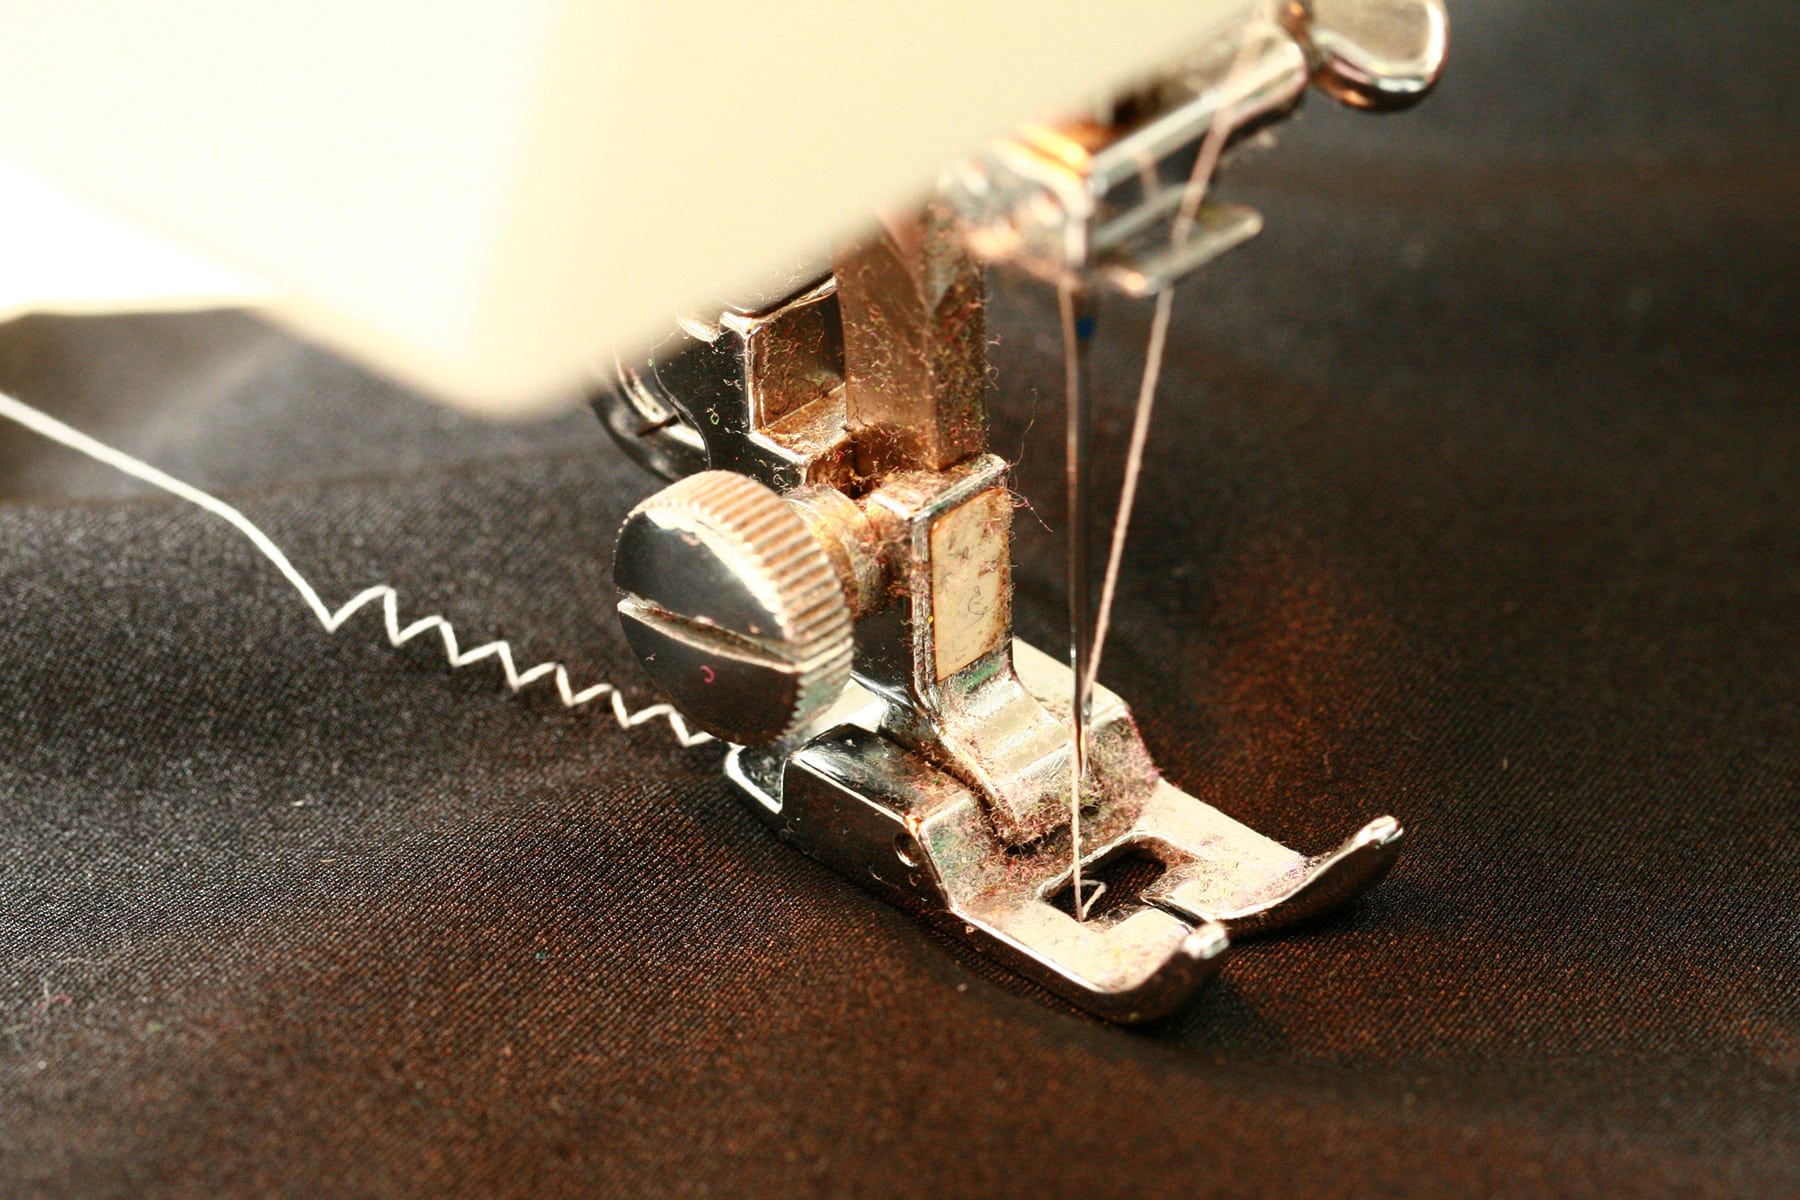 A close up view of a sewing machine sewing spandex with a zig zag stitch.